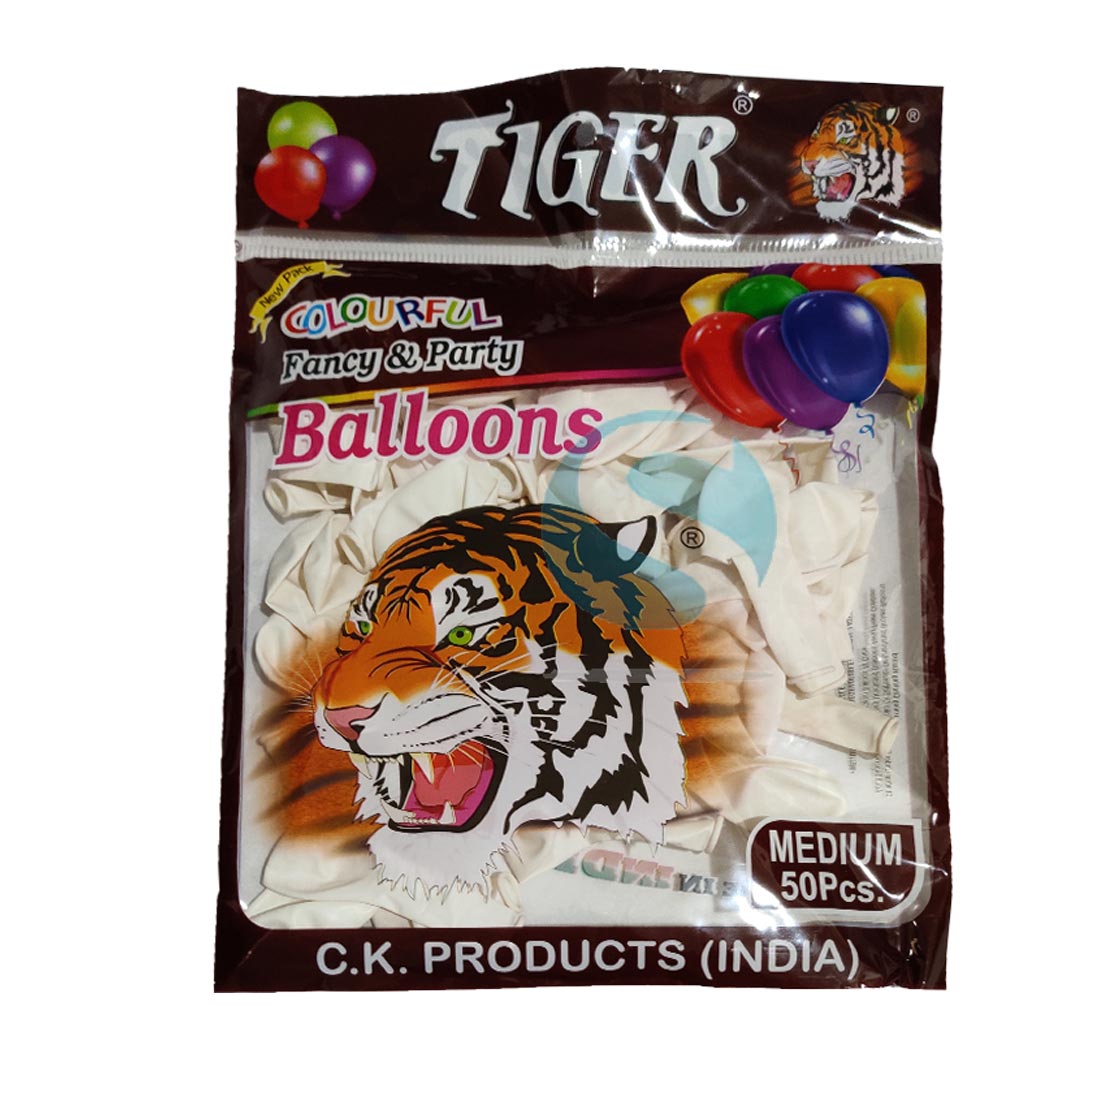 Tiger Balloons for Party (White)